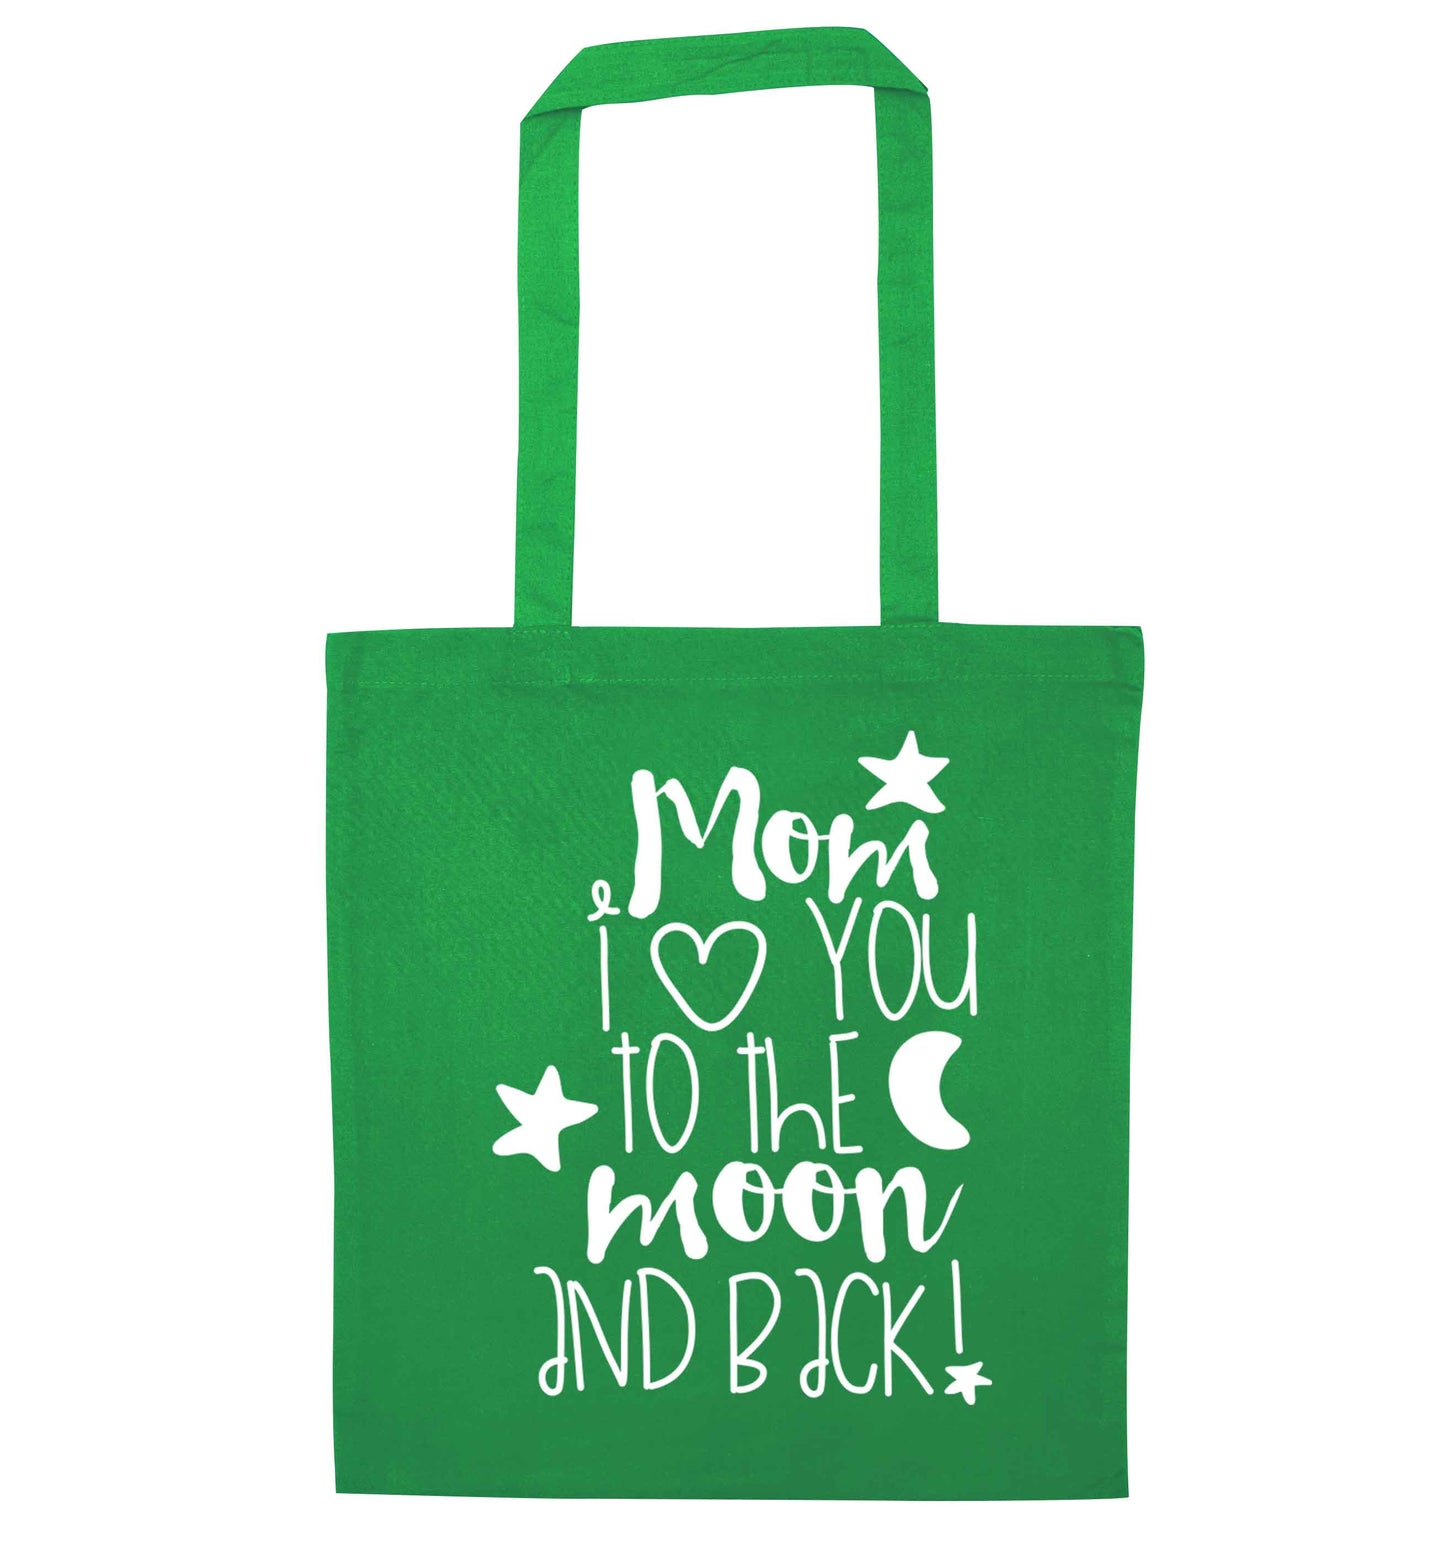 Mom I love you to the moon and back green tote bag